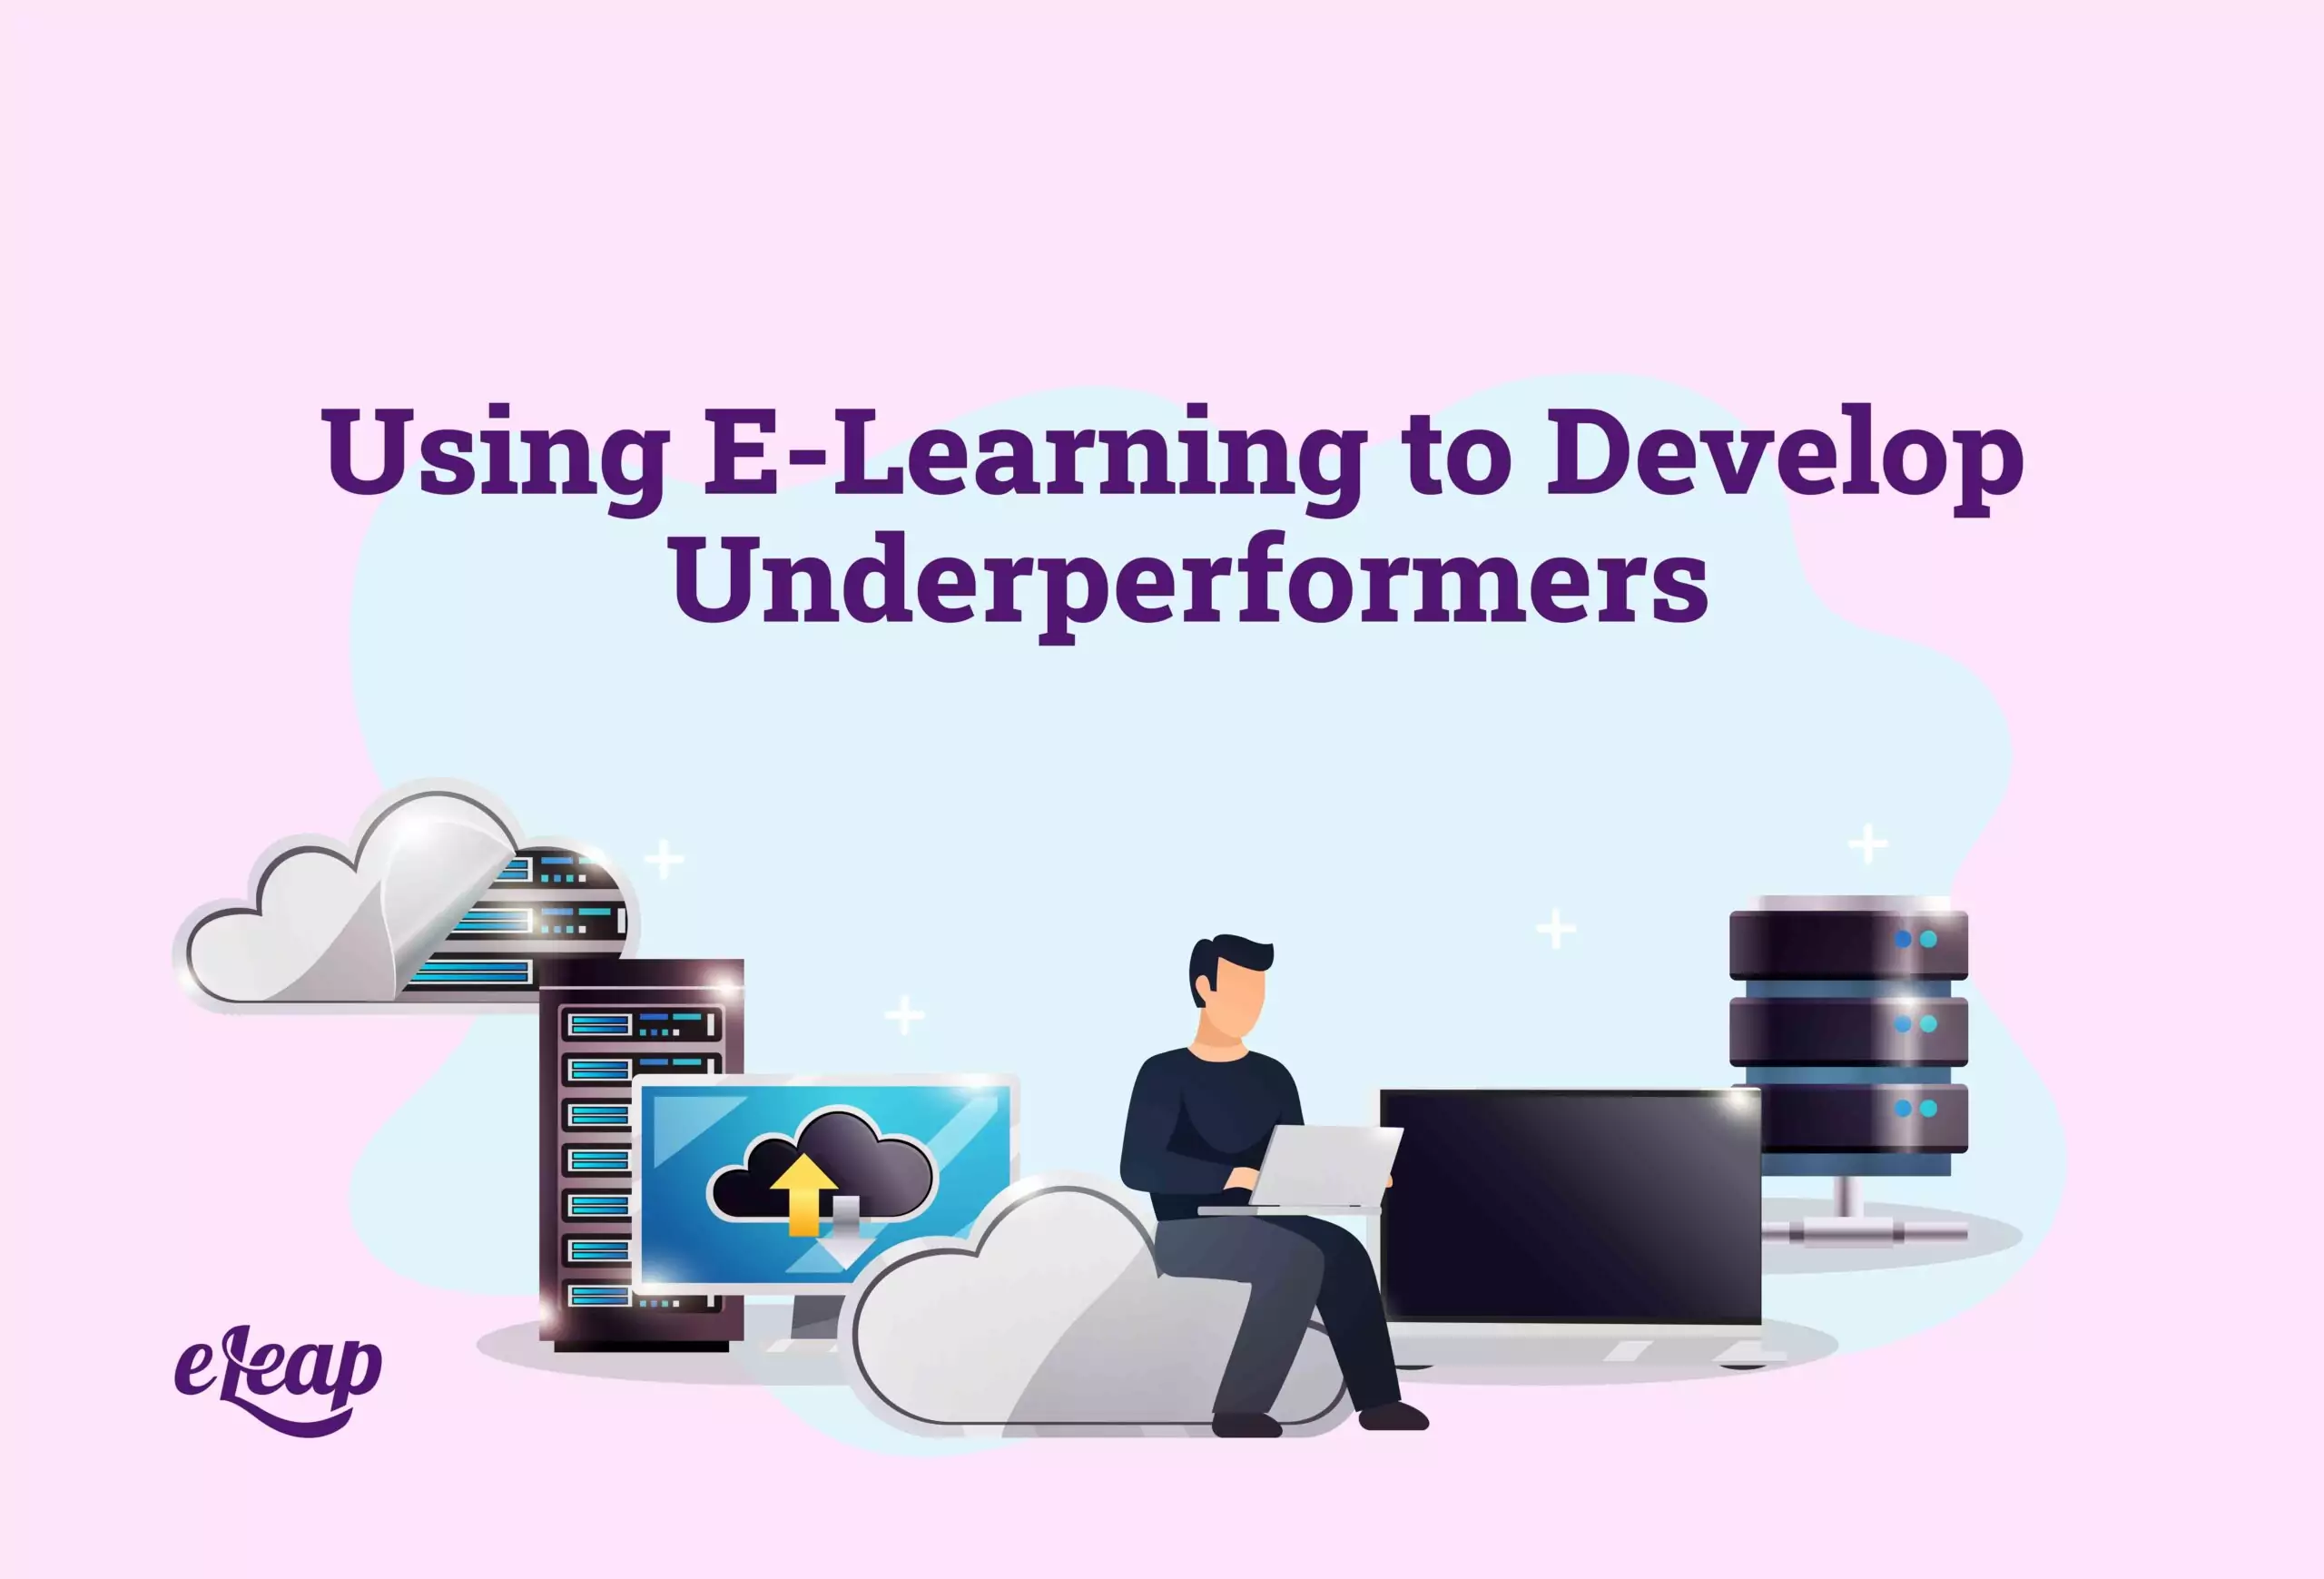 Using E-Learning to Develop Underperformers